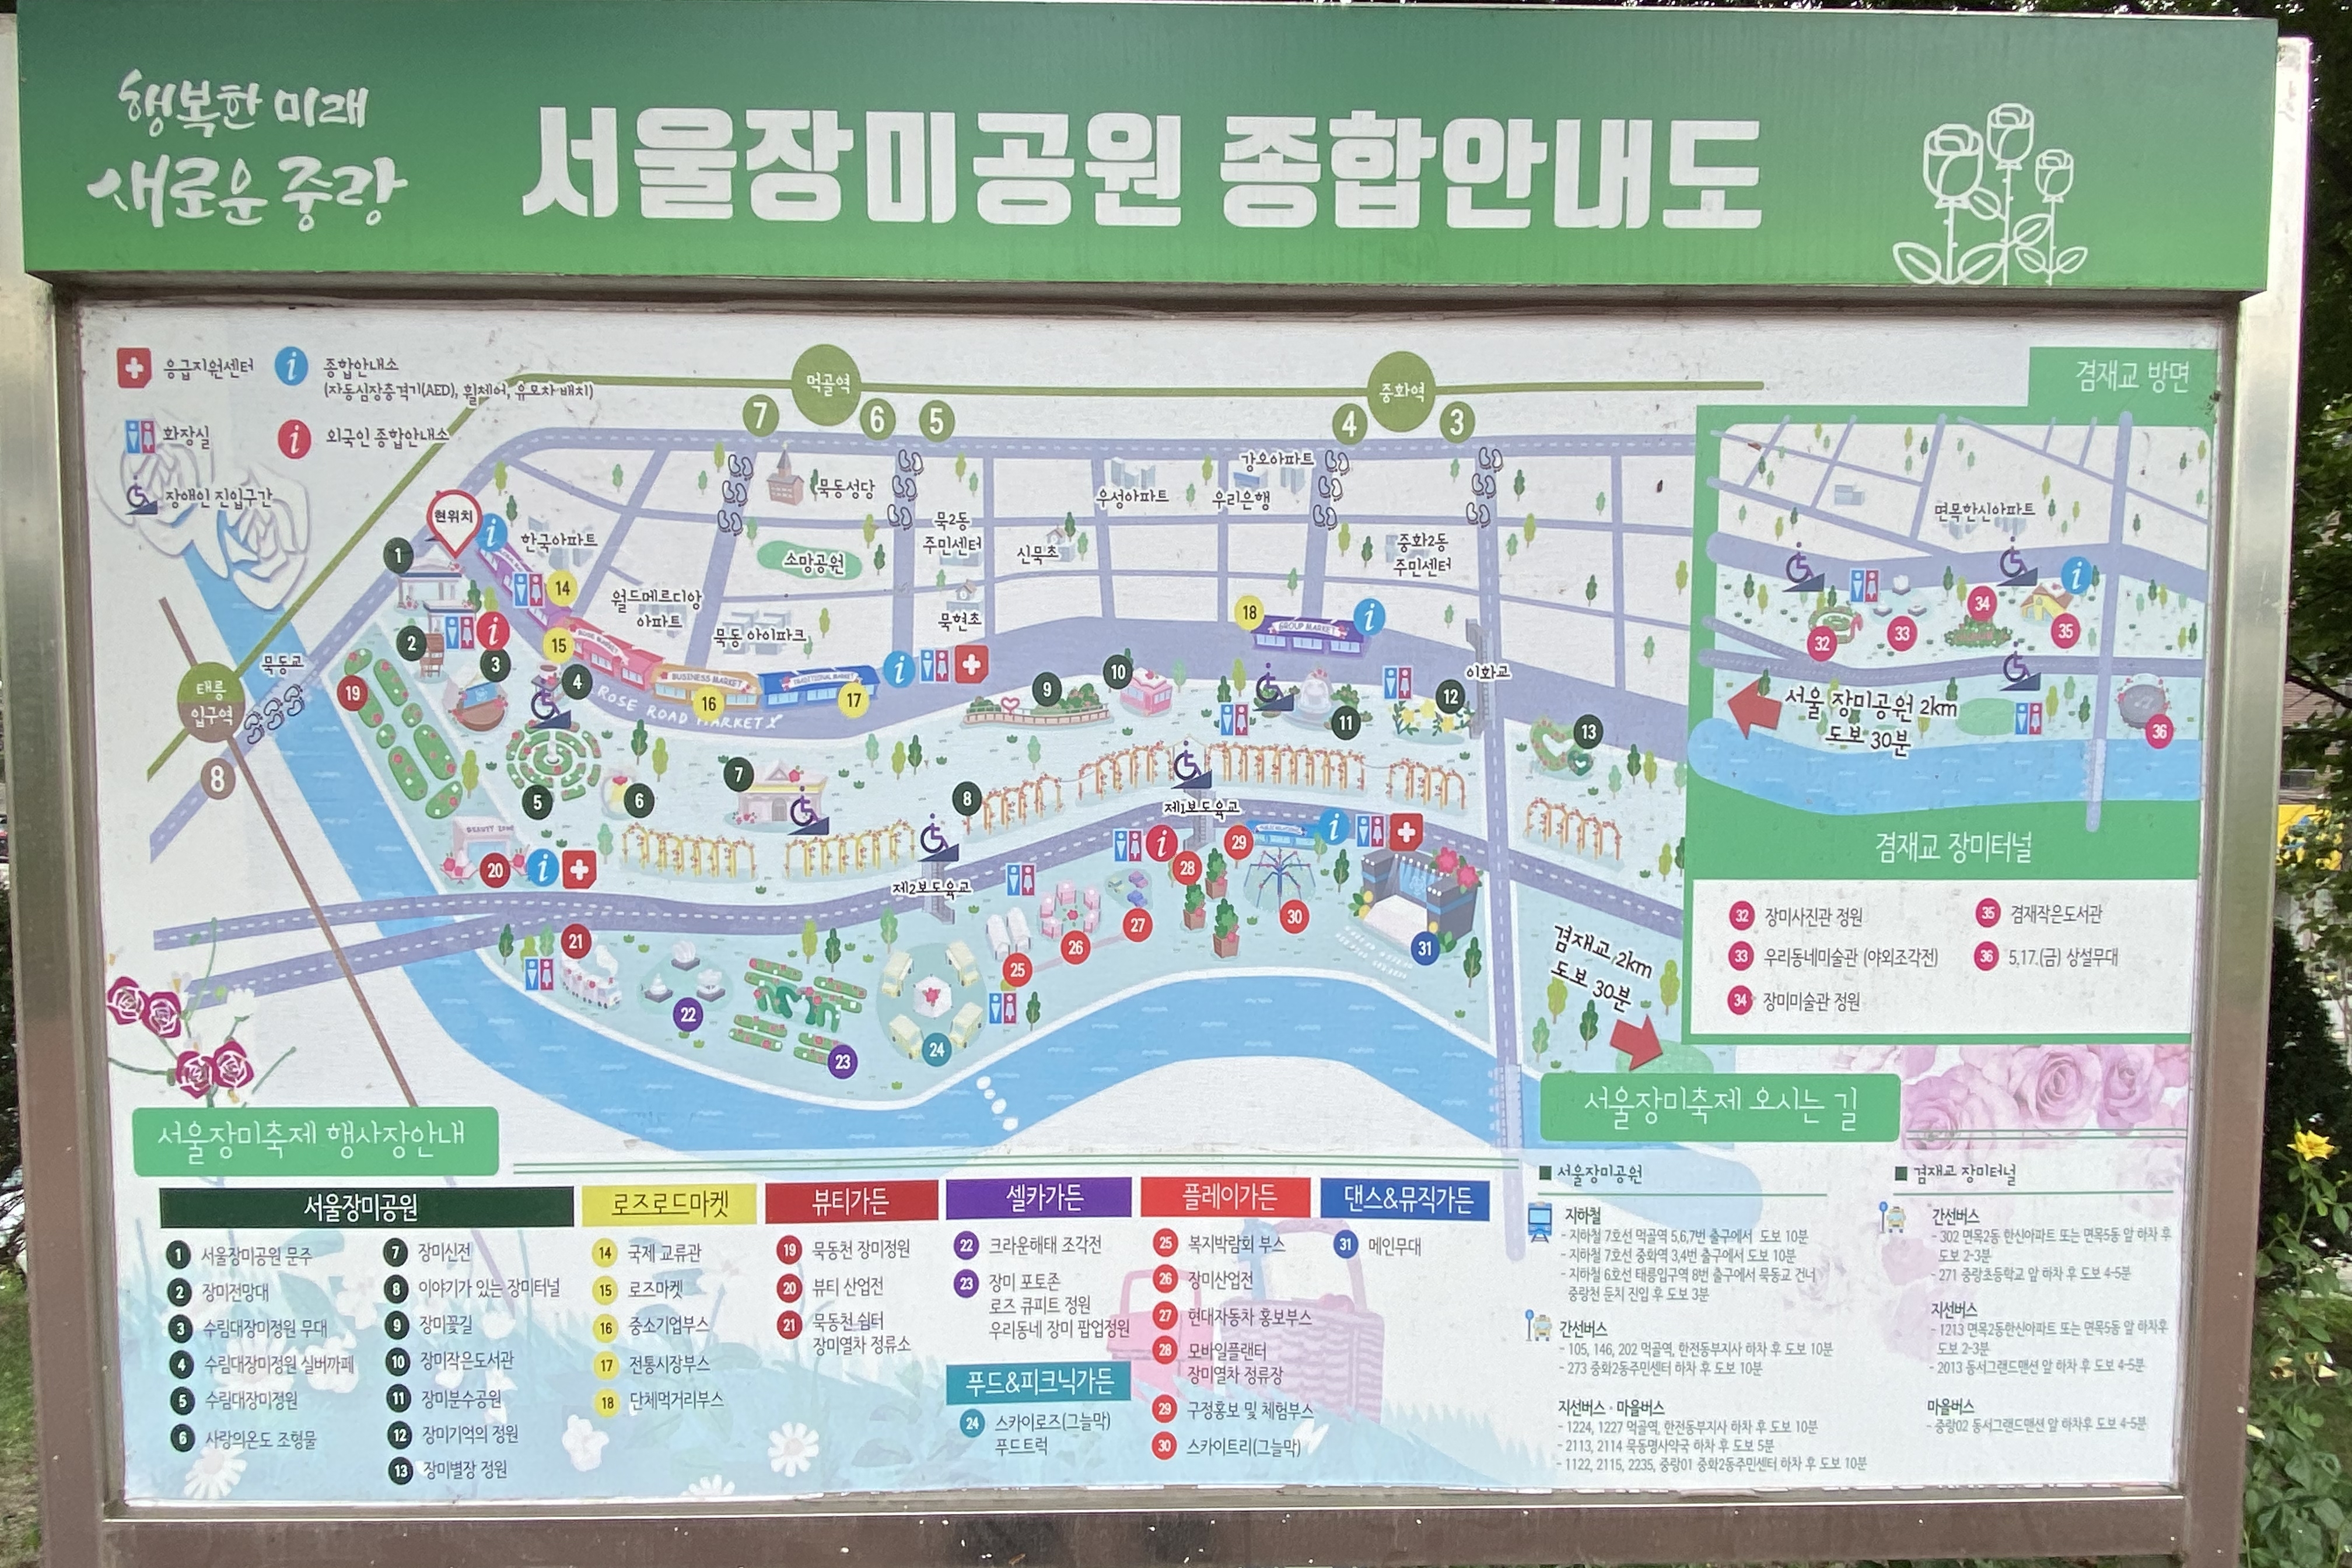 Guide map and information desk0 : Guide map of Seoul Rose Park (Jungnang Rose Park) 2